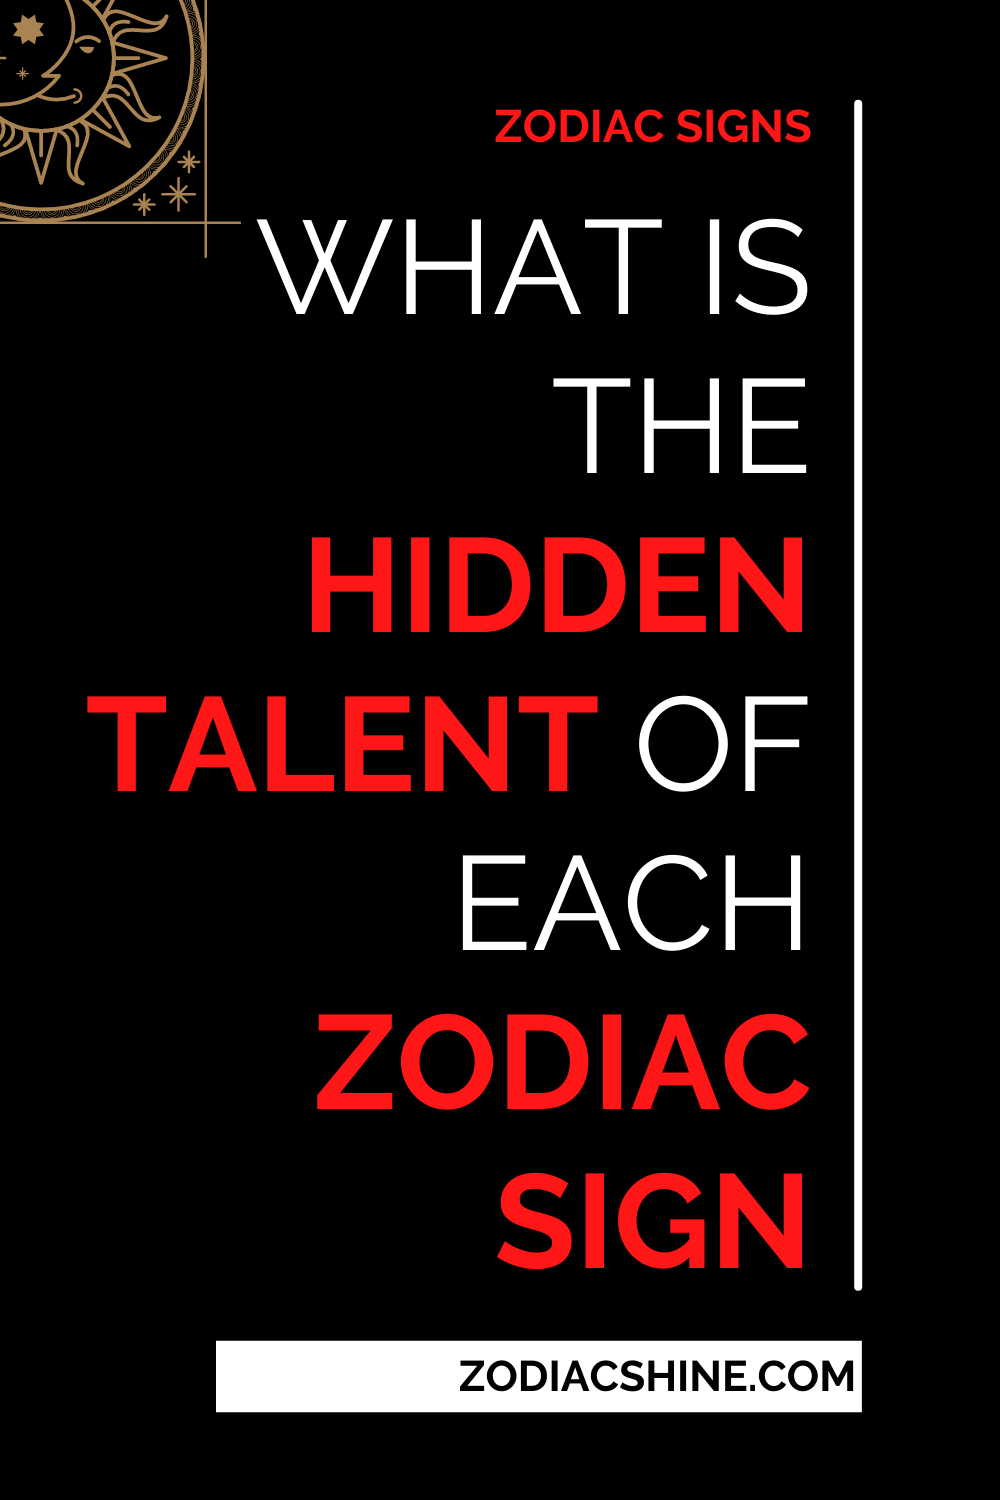 What Is The Hidden Talent Of Each Zodiac Sign